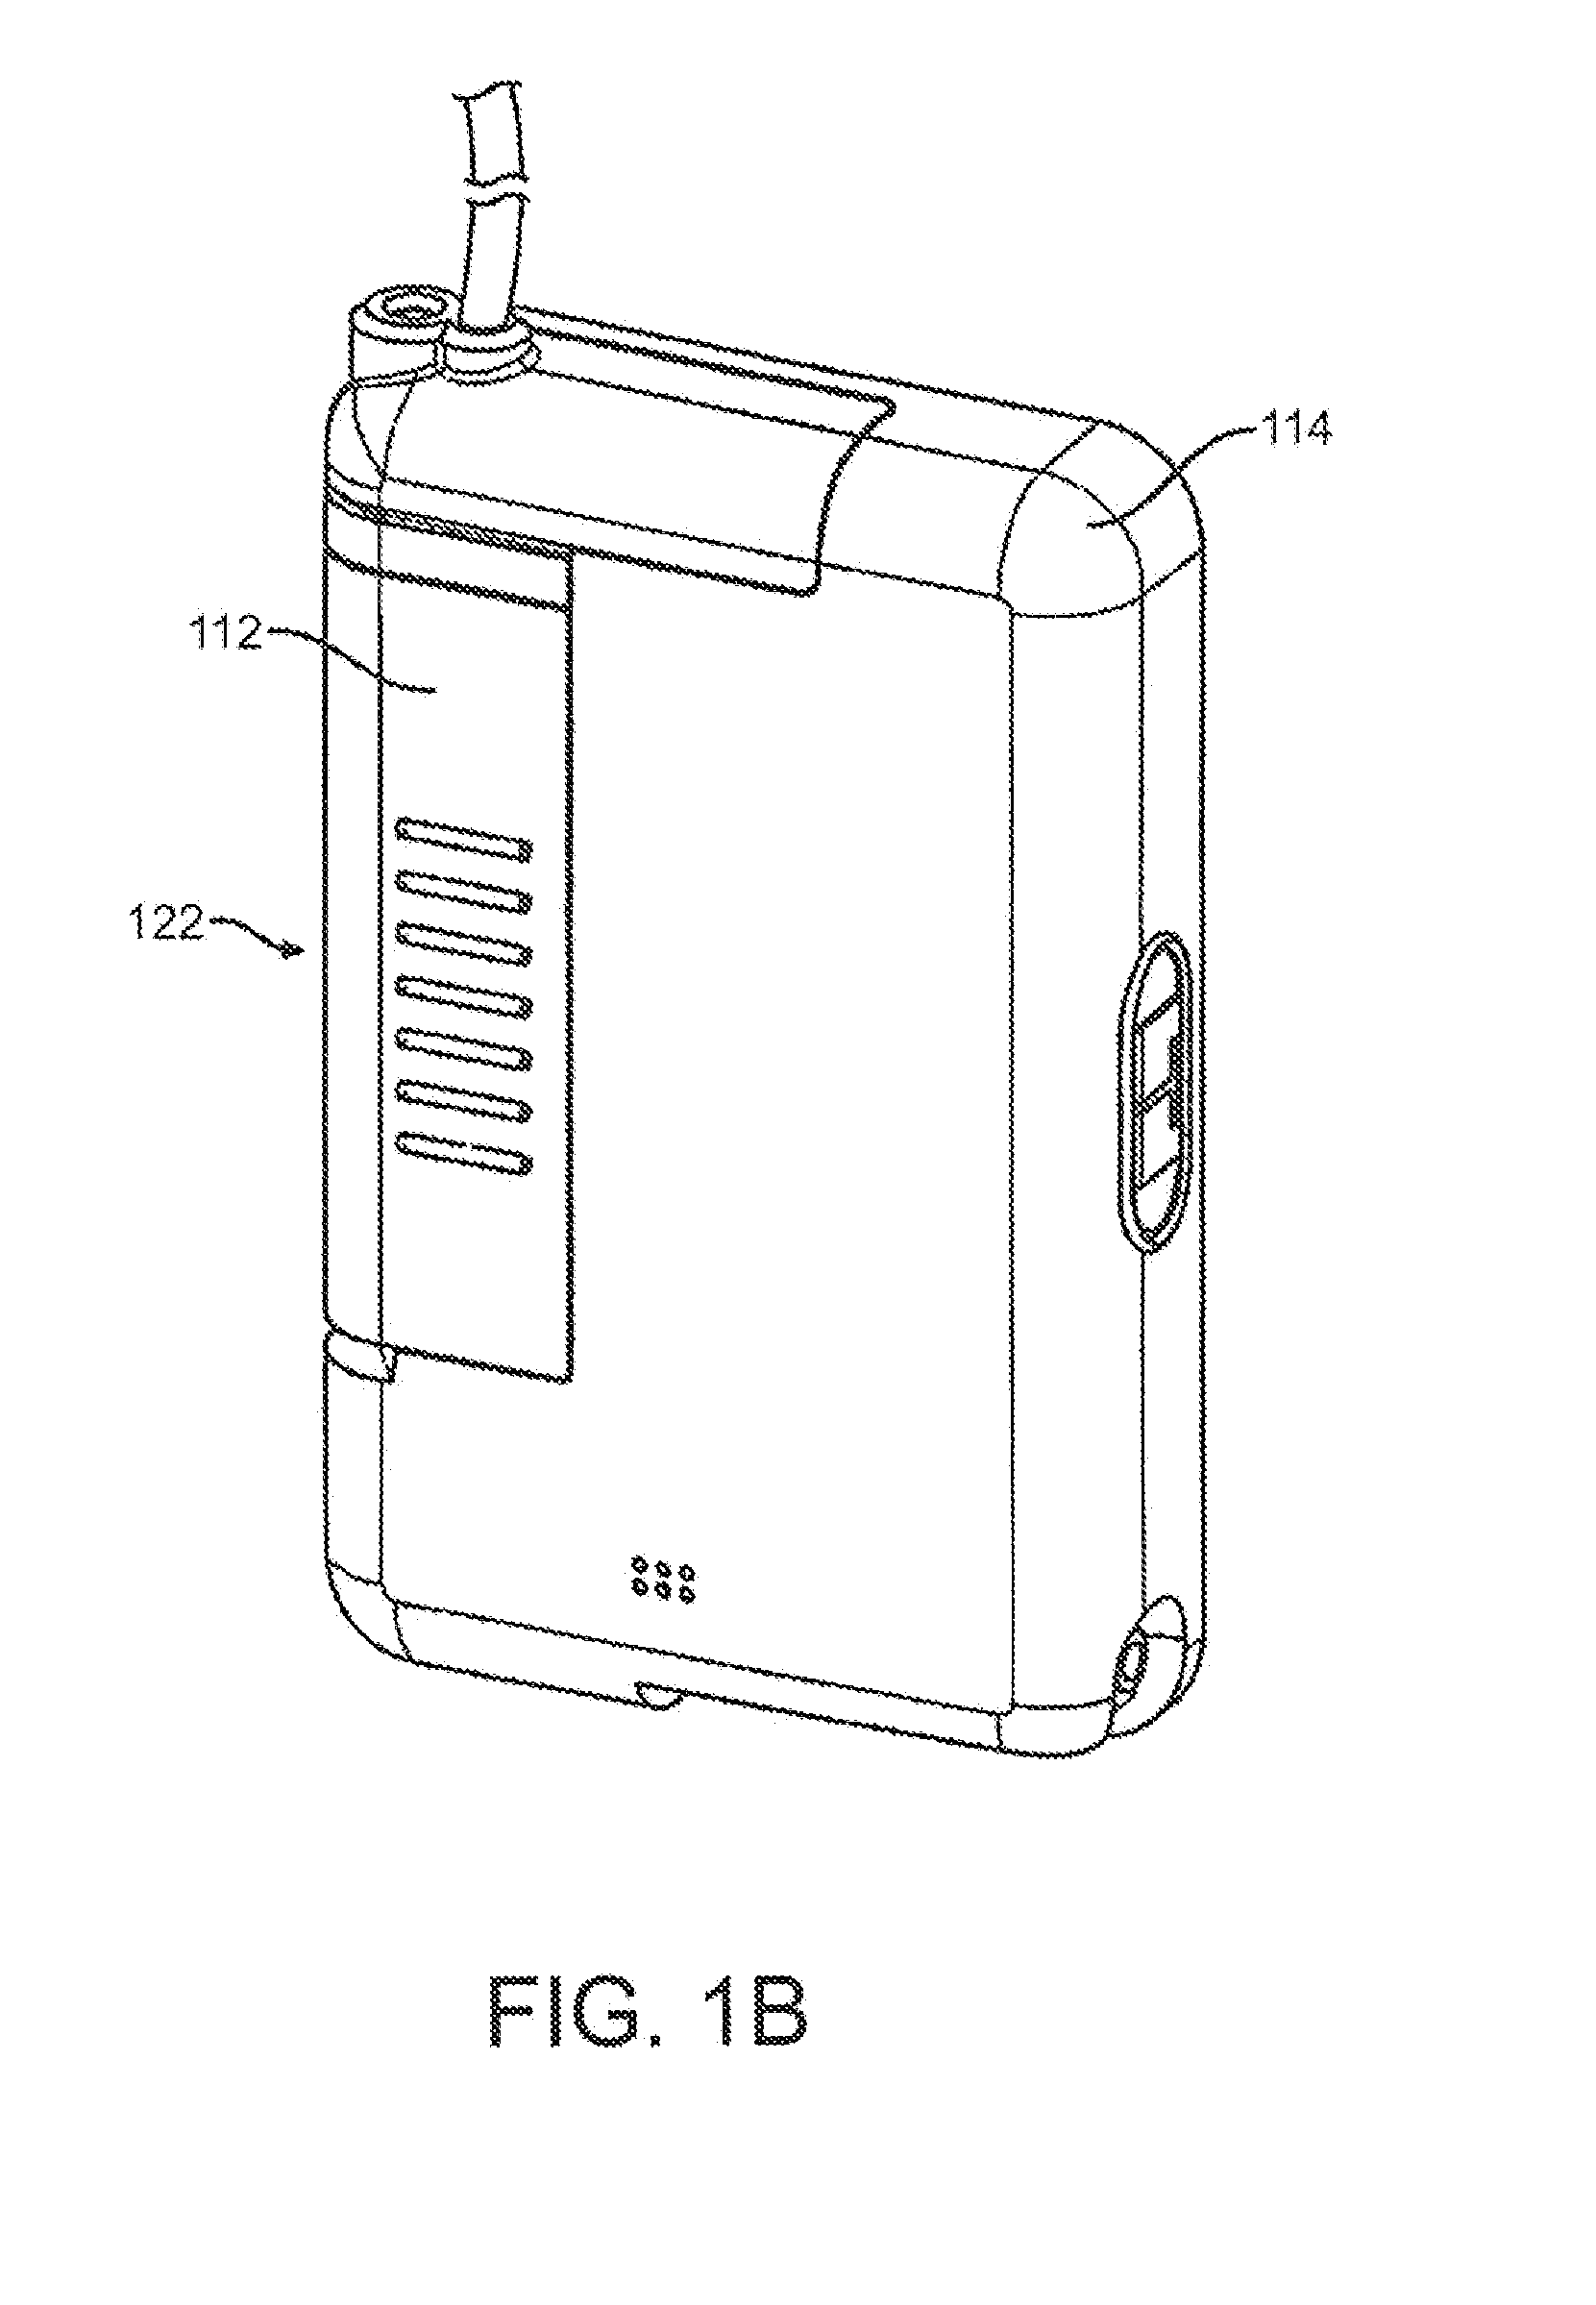 System and method for detecting occlusions in an infusion pump